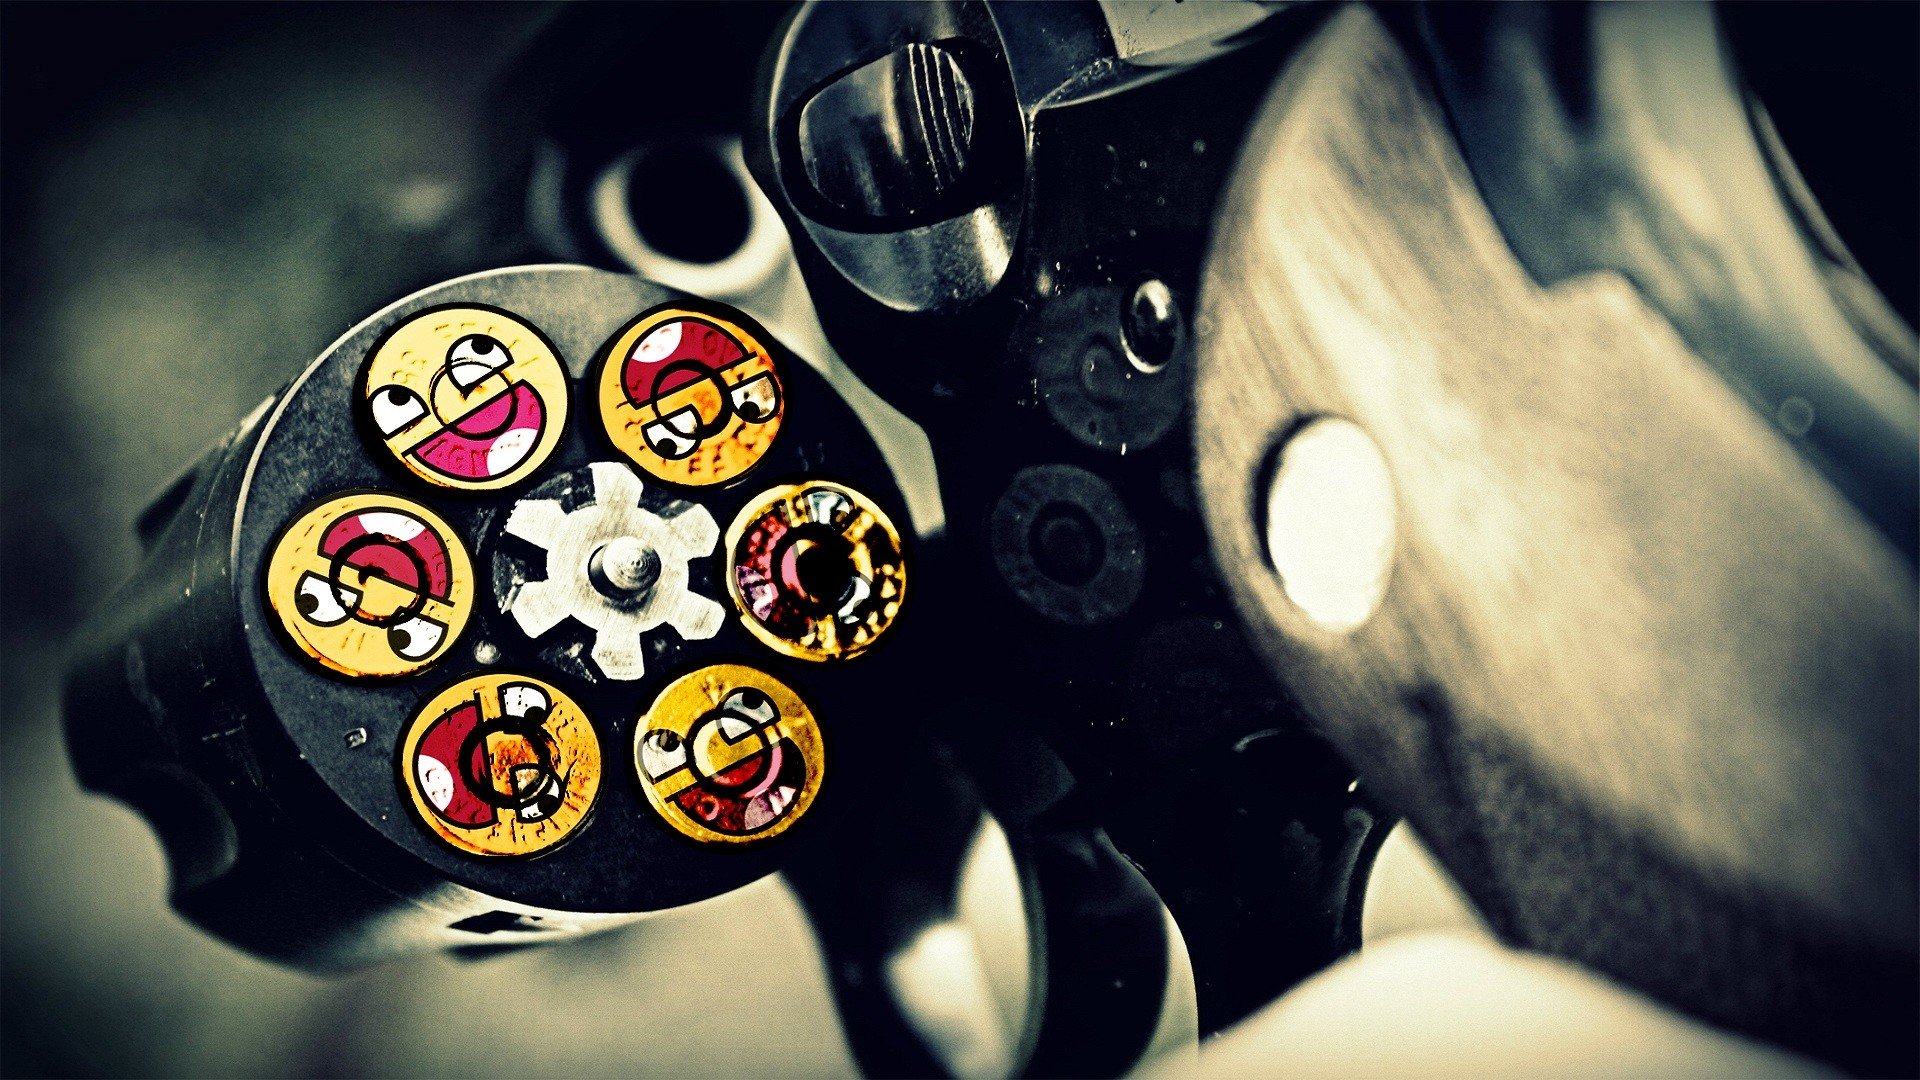 Guns Ammunition Smiley Face Awesome Wallpaper Background